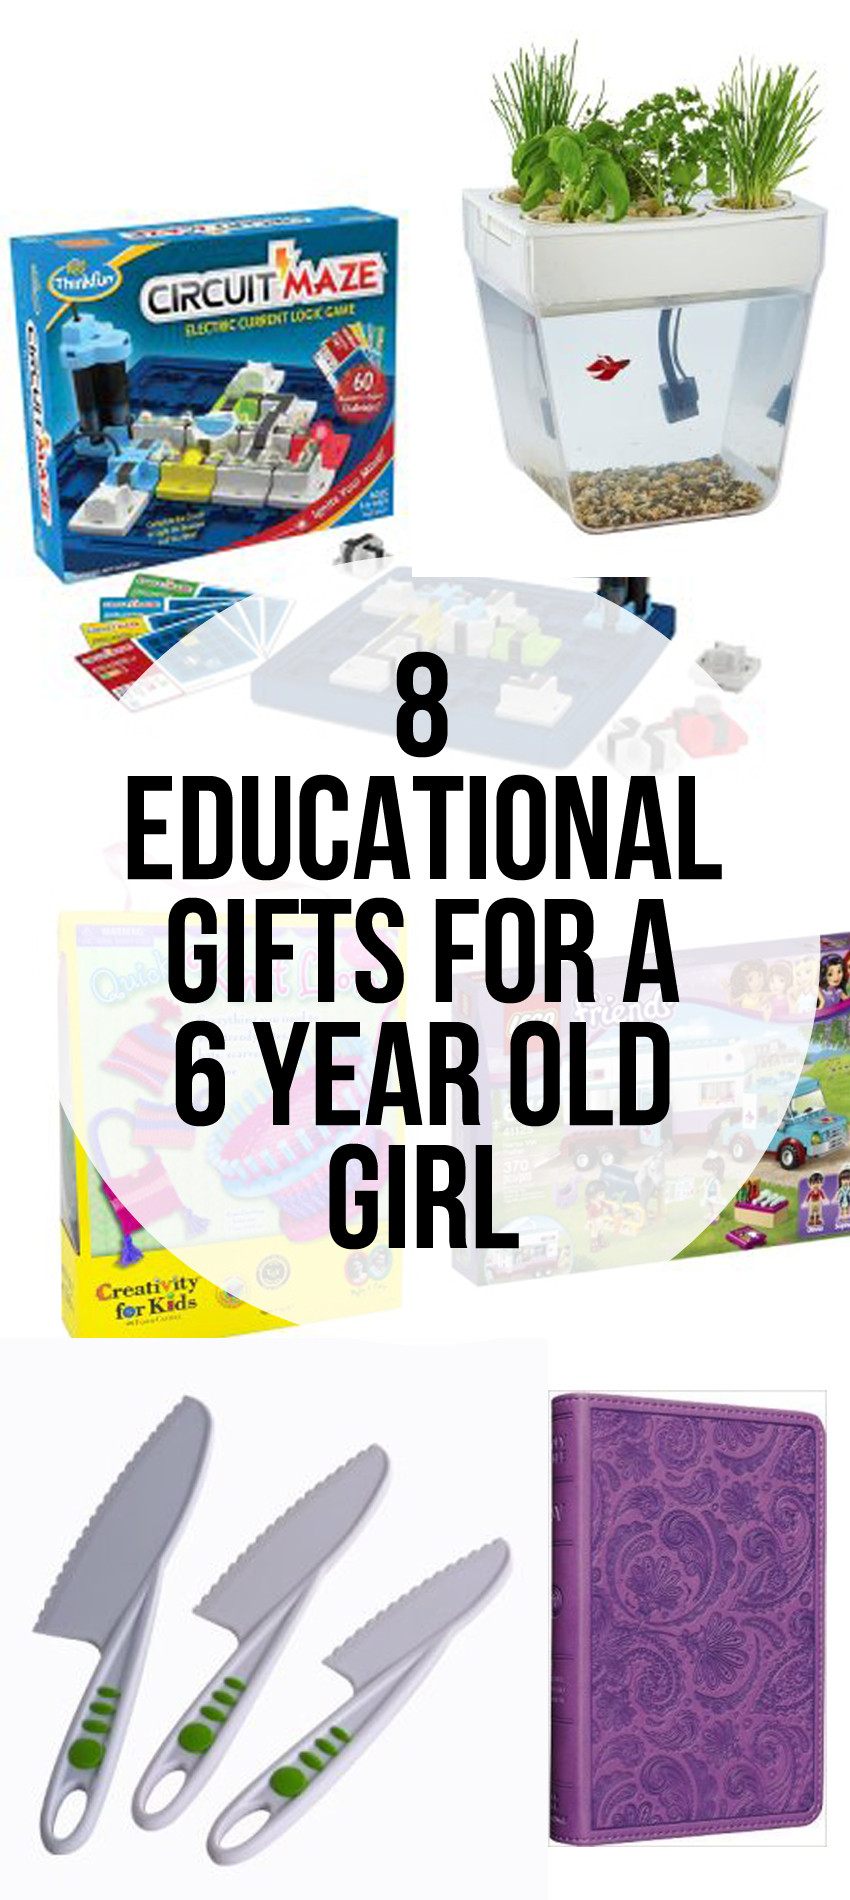 Gift Ideas For Six Year Old Girls
 8 Educational Gift Ideas for a 6 Year Old Girl